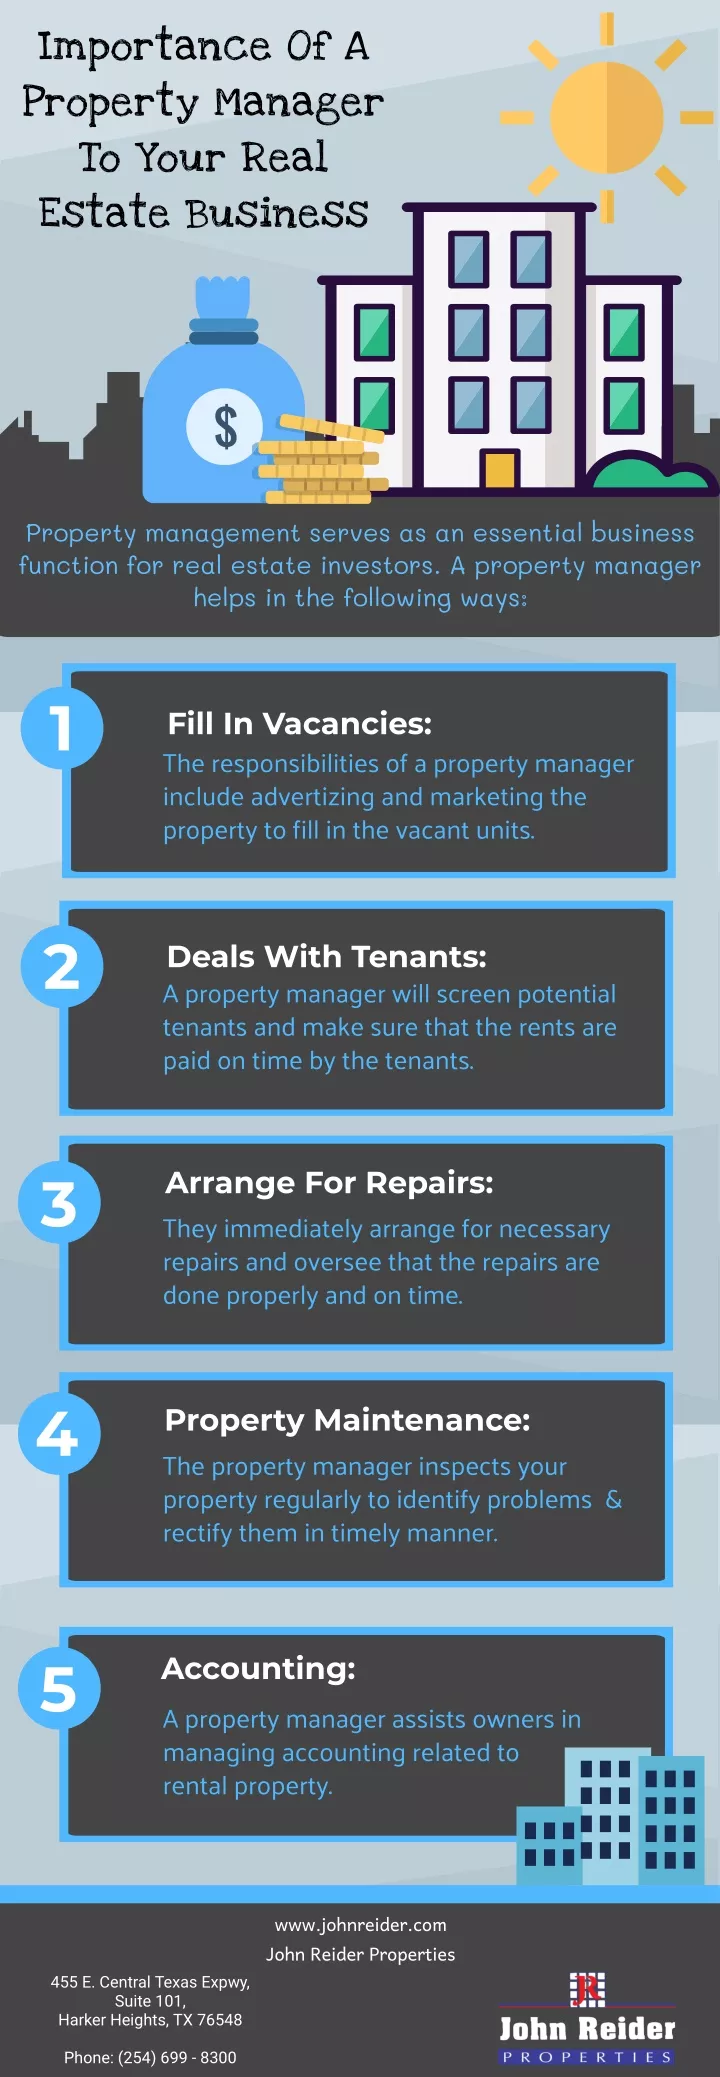 importance of a property manager to your real